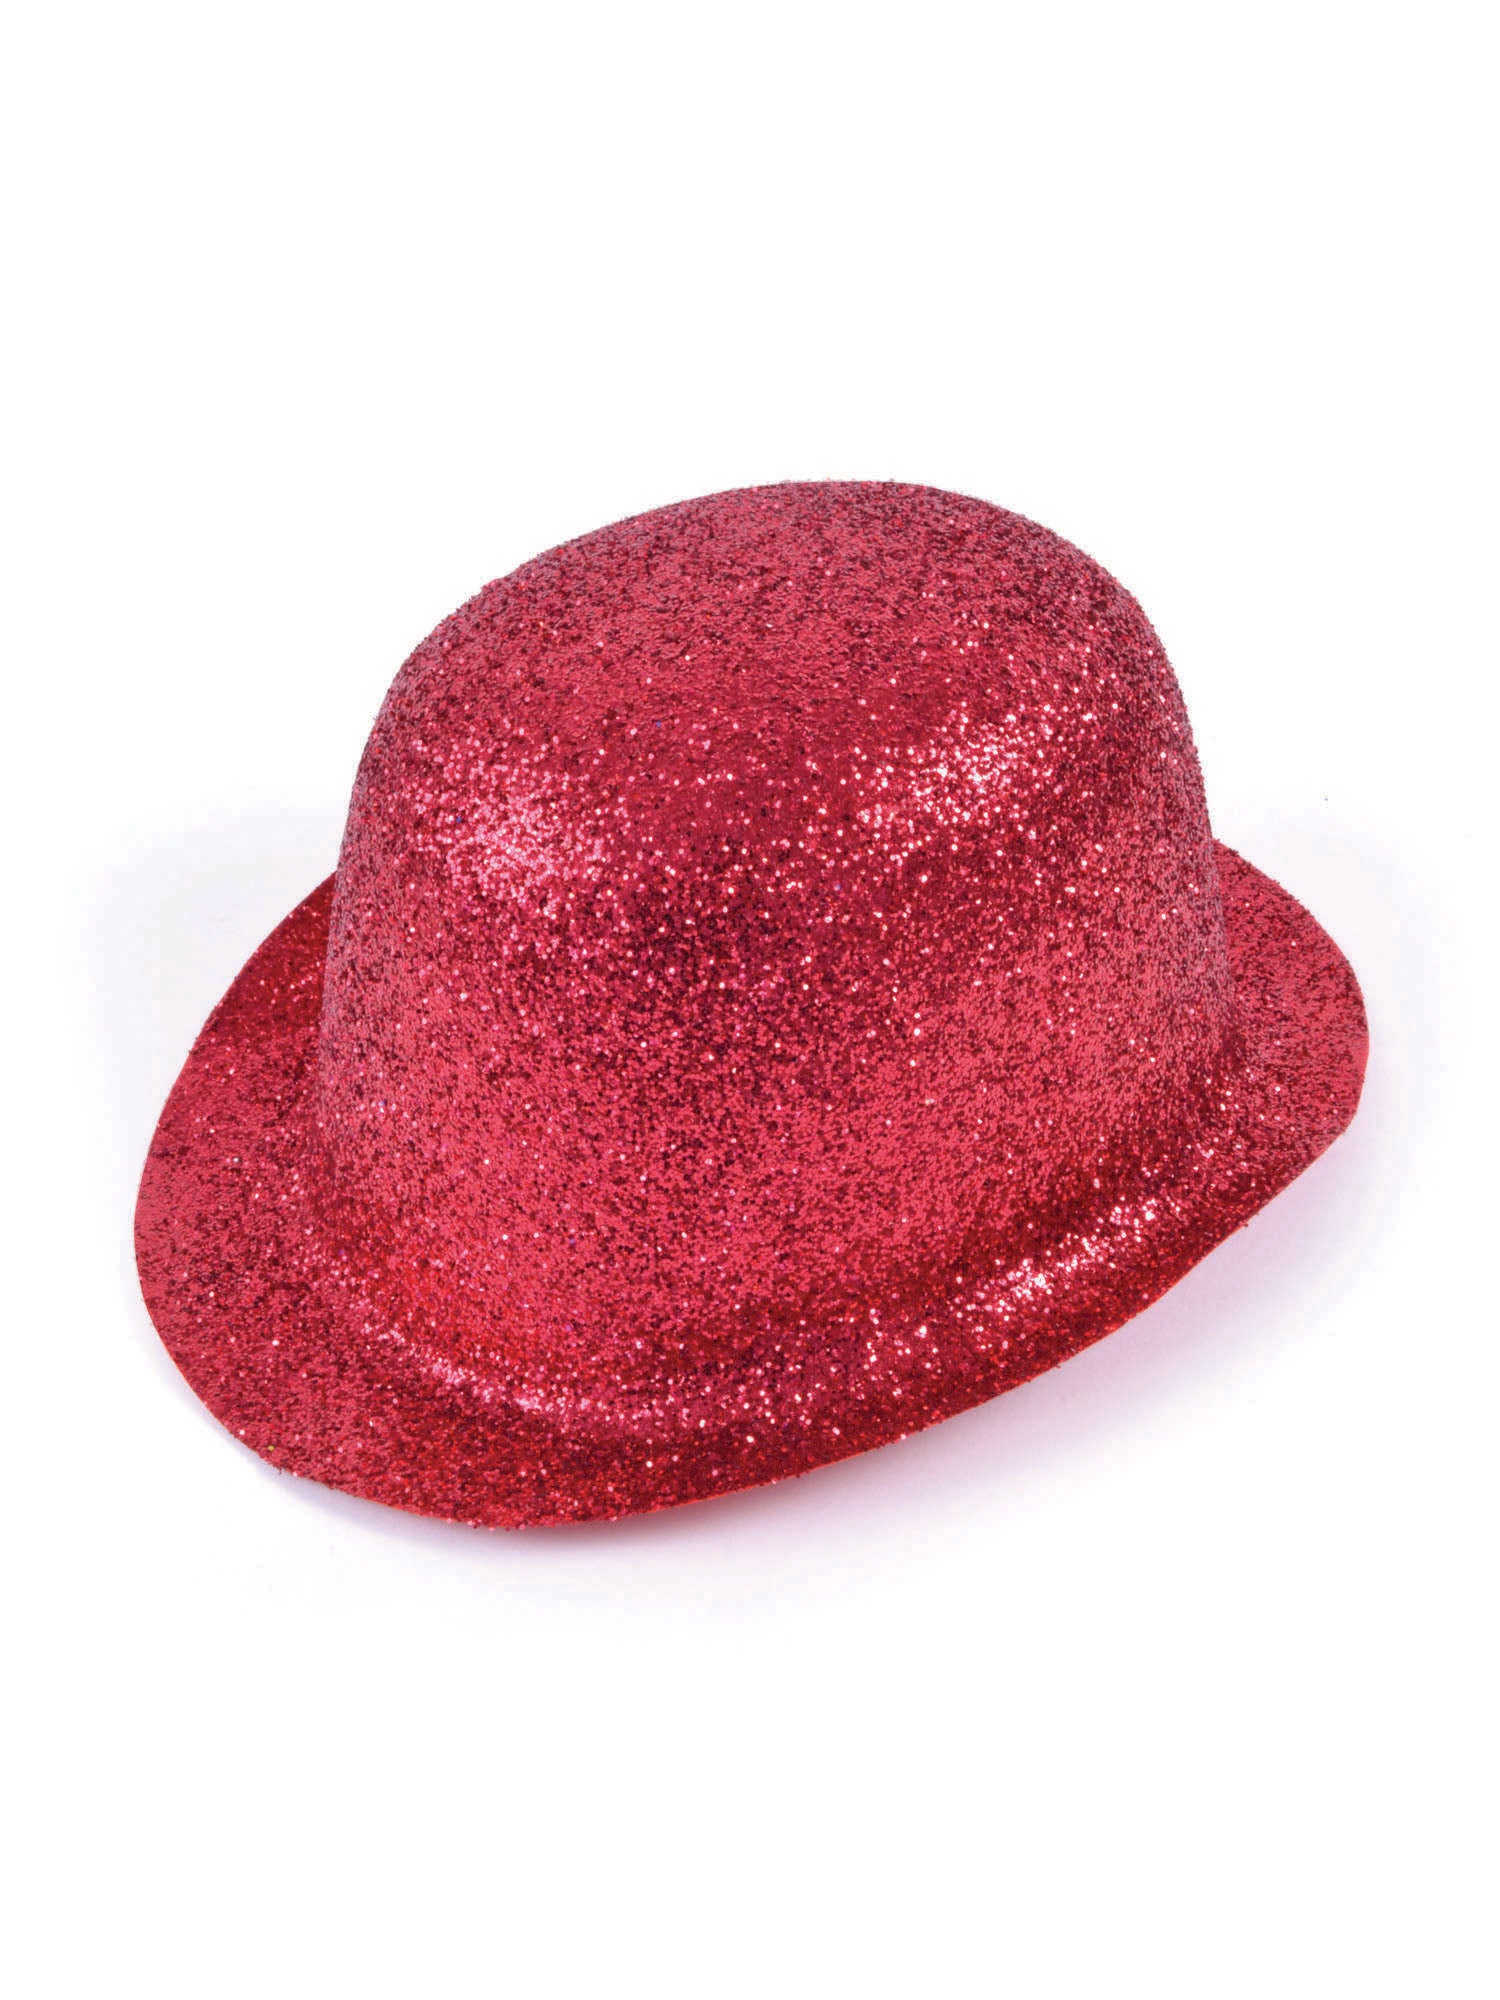 Bowler, Red, Generic, Hat, One Size, Front